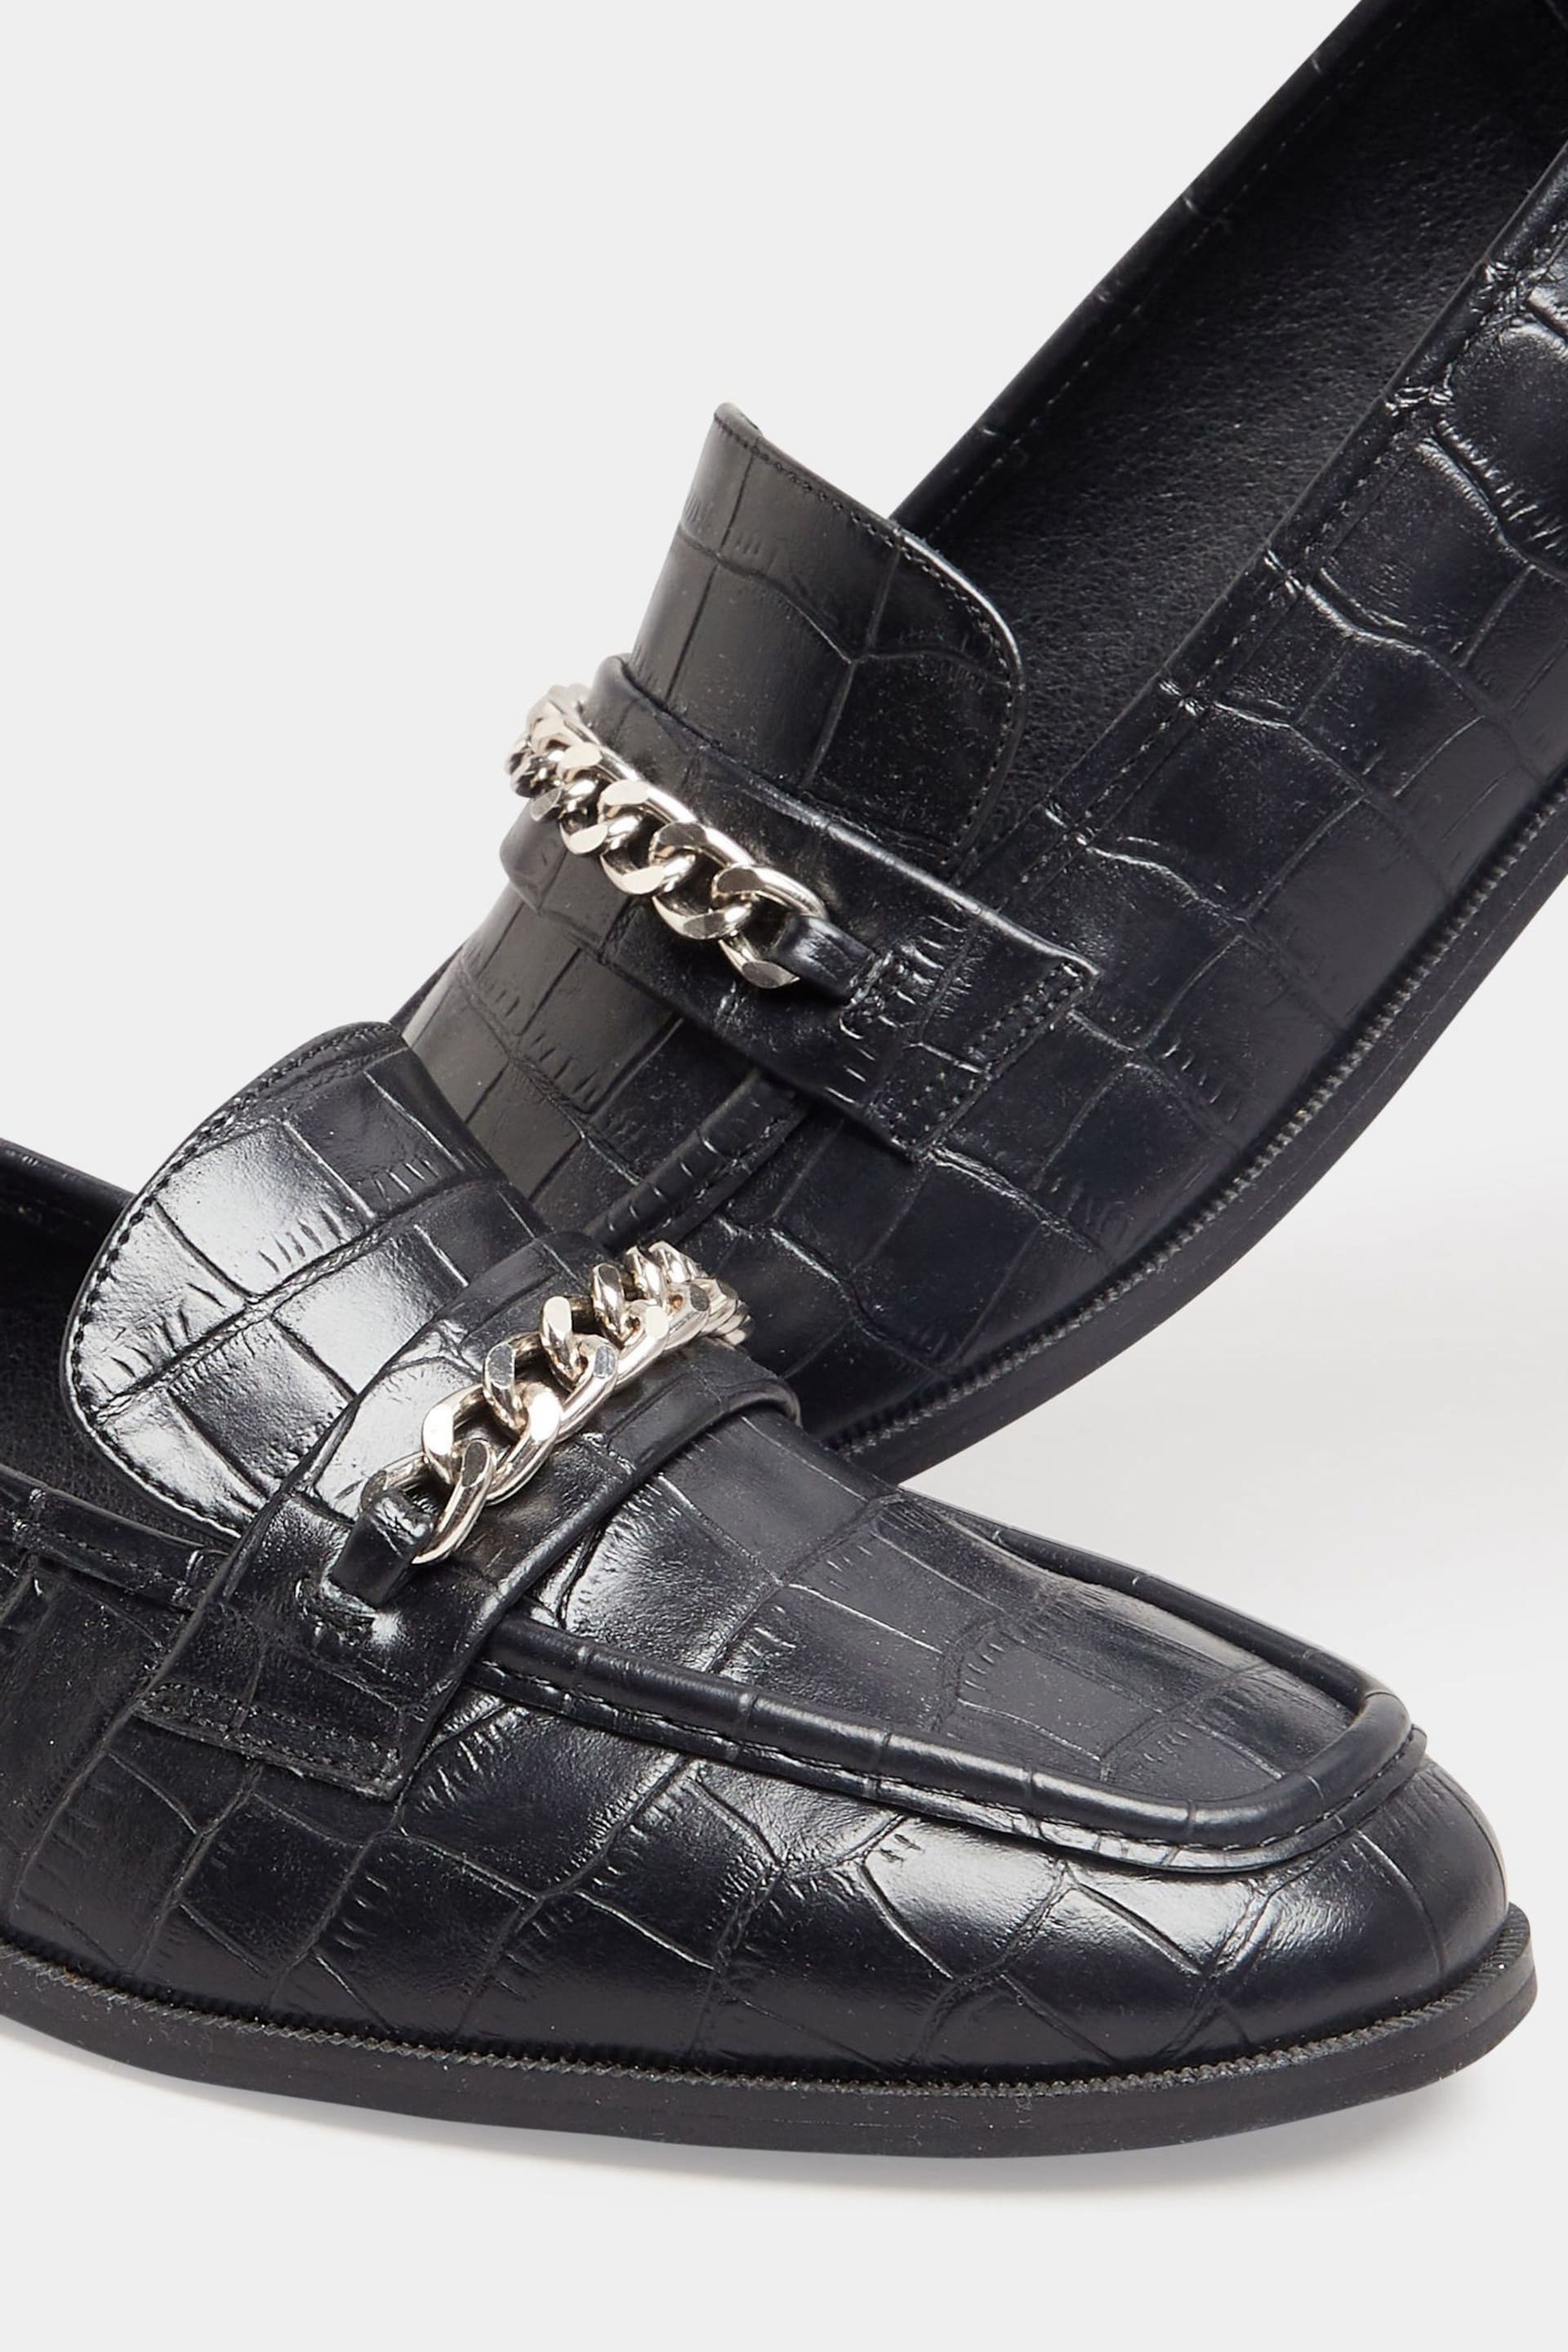 Long Tall Sally Black Hardware Trim Loafers - Image 3 of 4